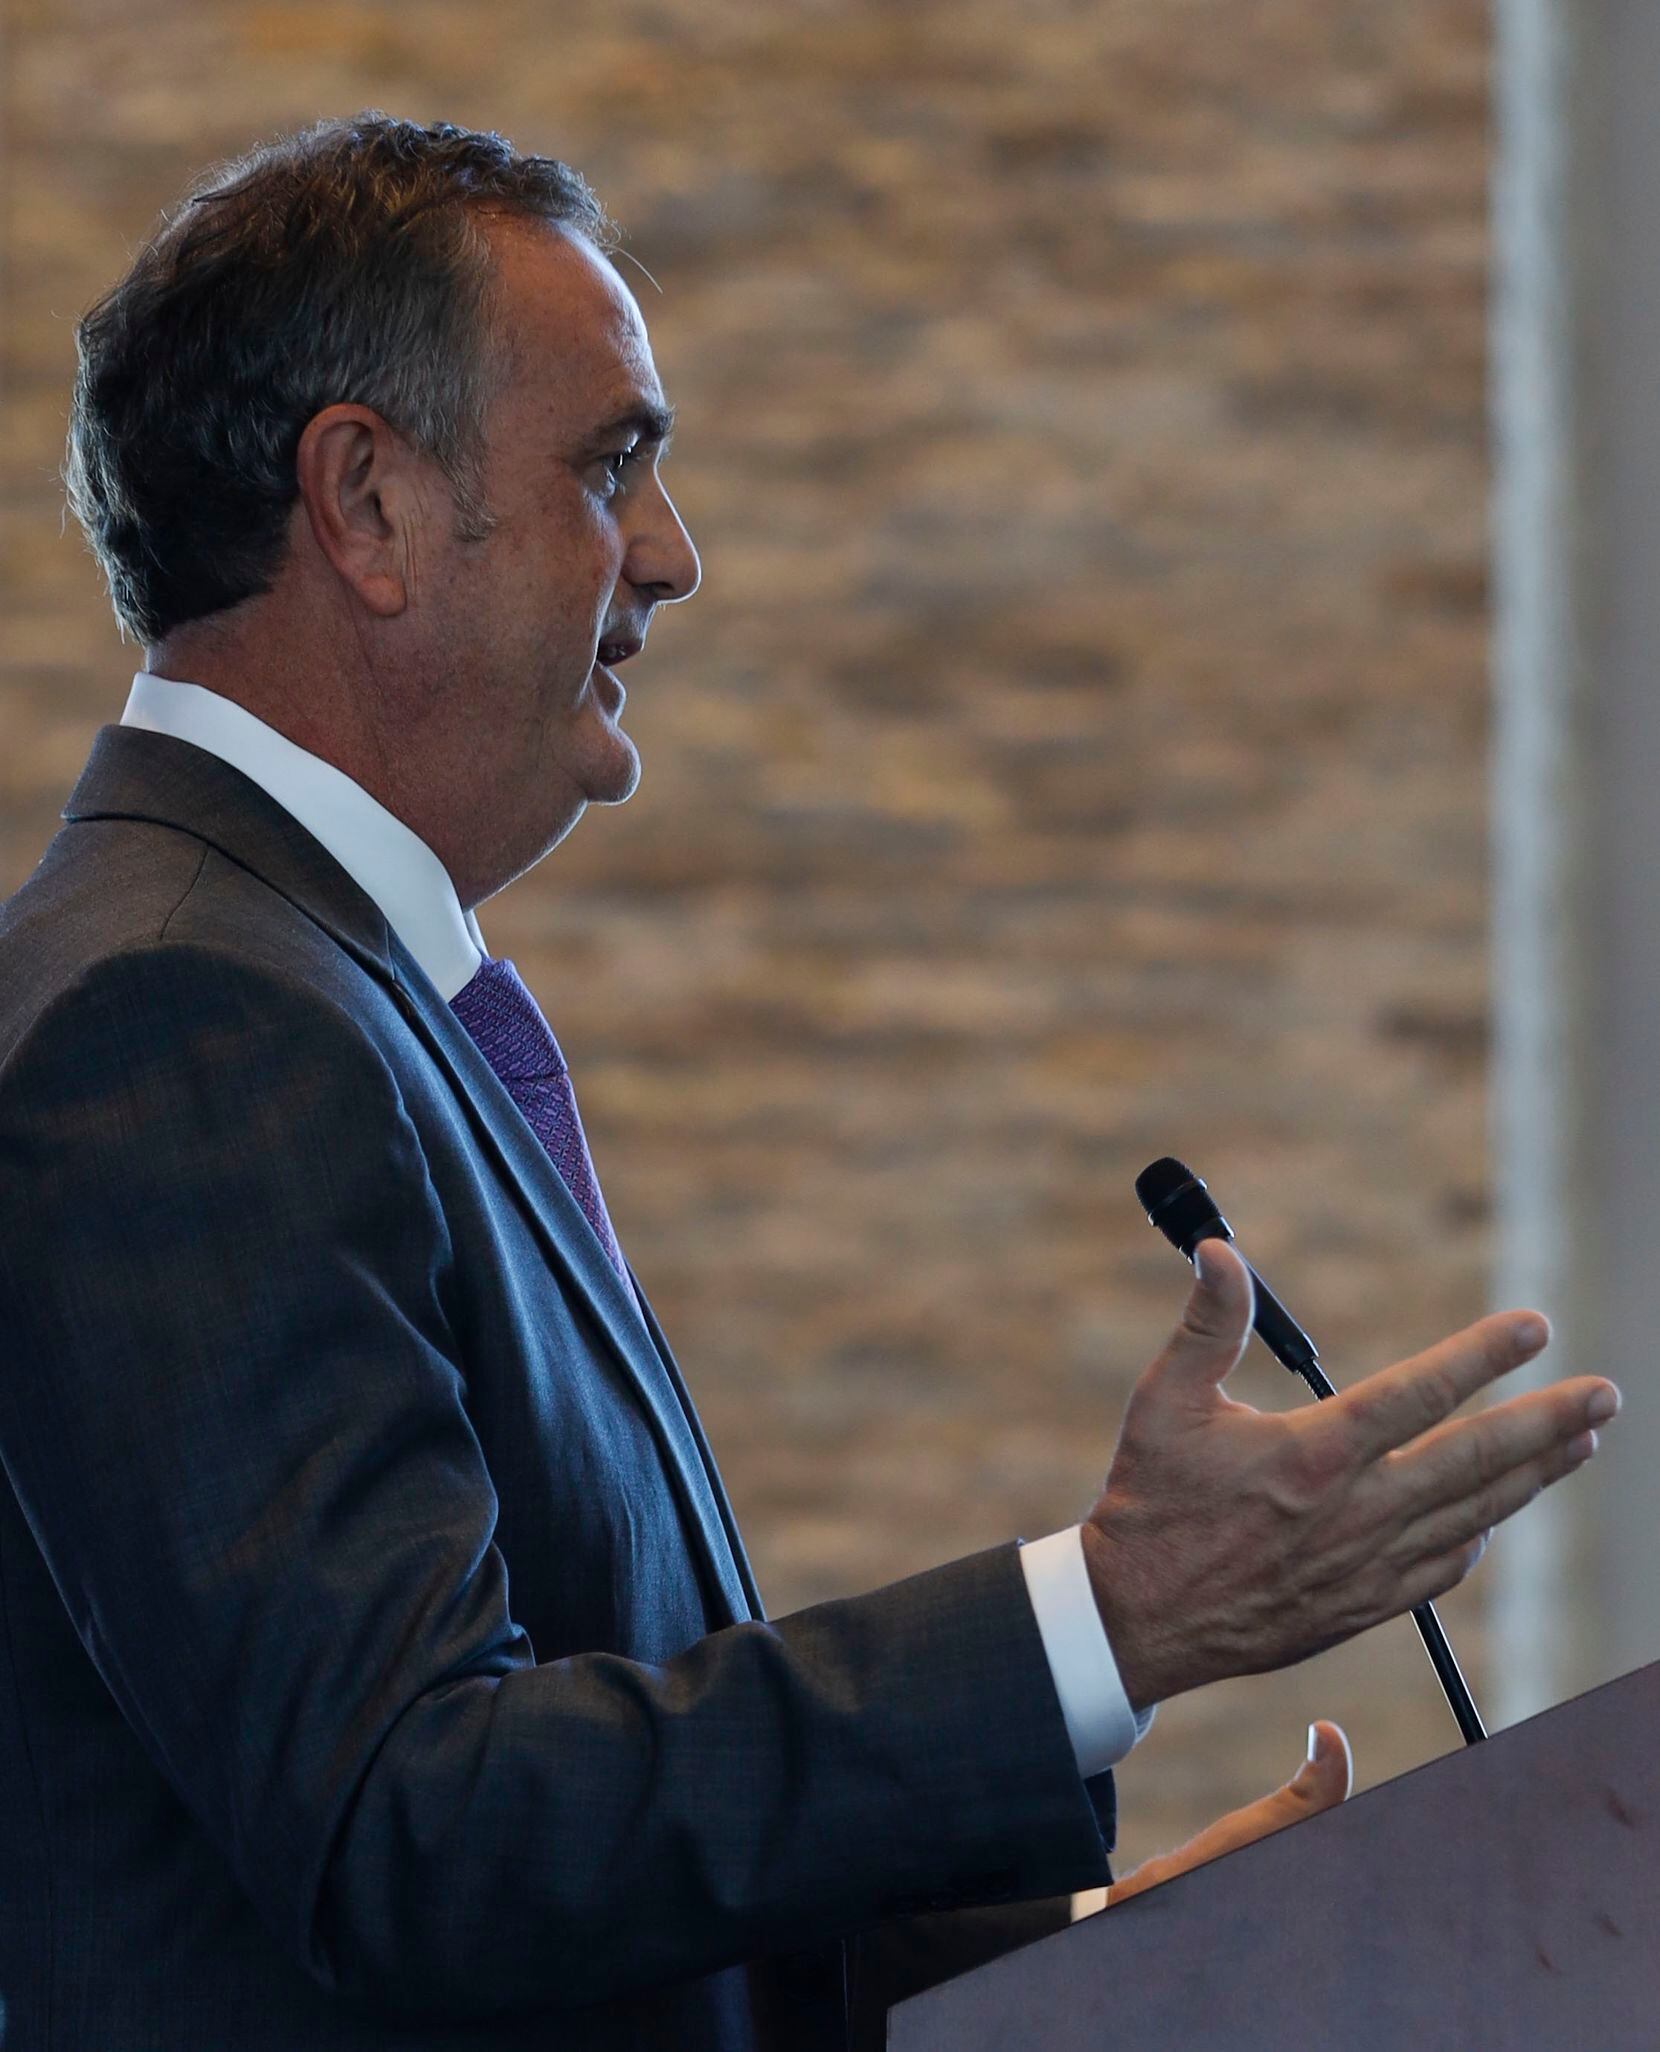 Texas Christian University's head football coach, Sonny Dykes, speaks at a news conference for the first time at Amon G. Carter Stadium in Fort Worth on Tuesday, Nov. 30, 2021. Dykes was formerly introduced as the new head coach of Texas Christian University's football team during the news conference.(Rebecca Slezak/The Dallas Morning News)